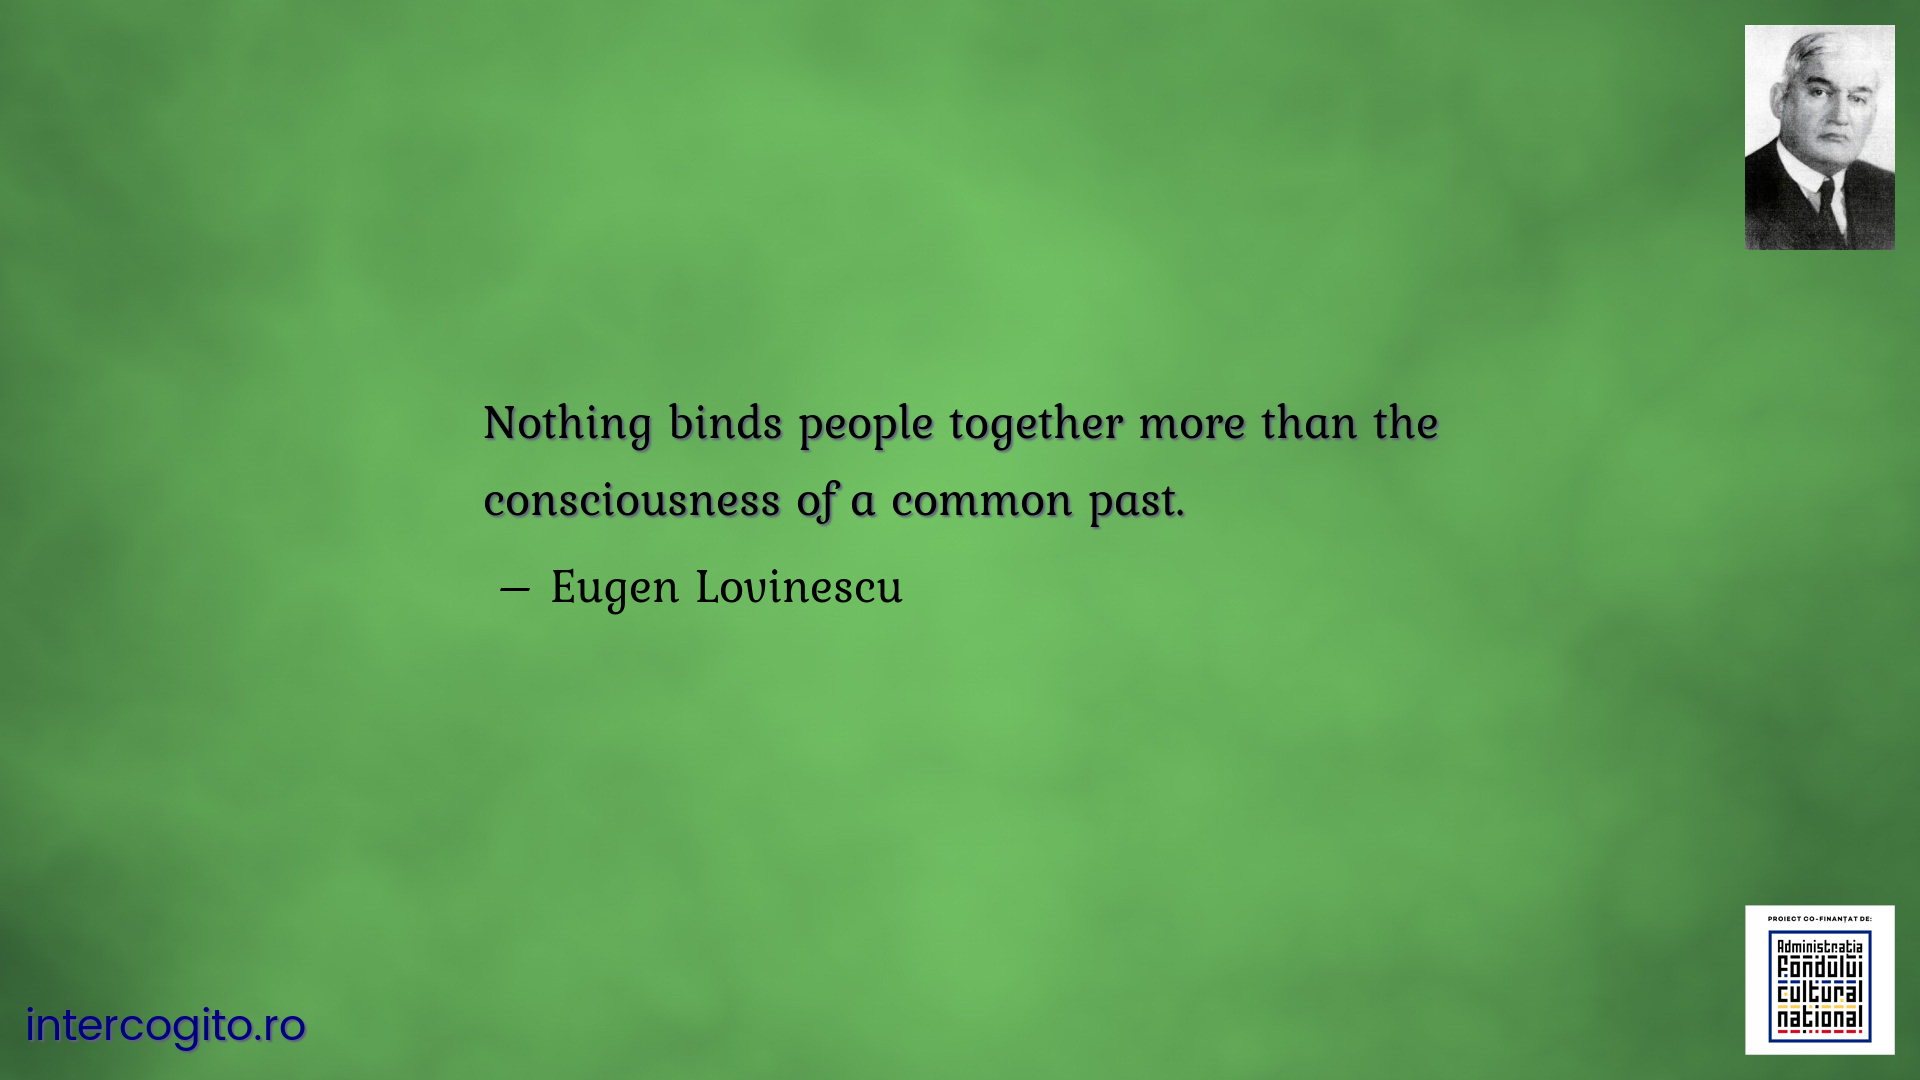 Nothing binds people together more than the consciousness of a common past.